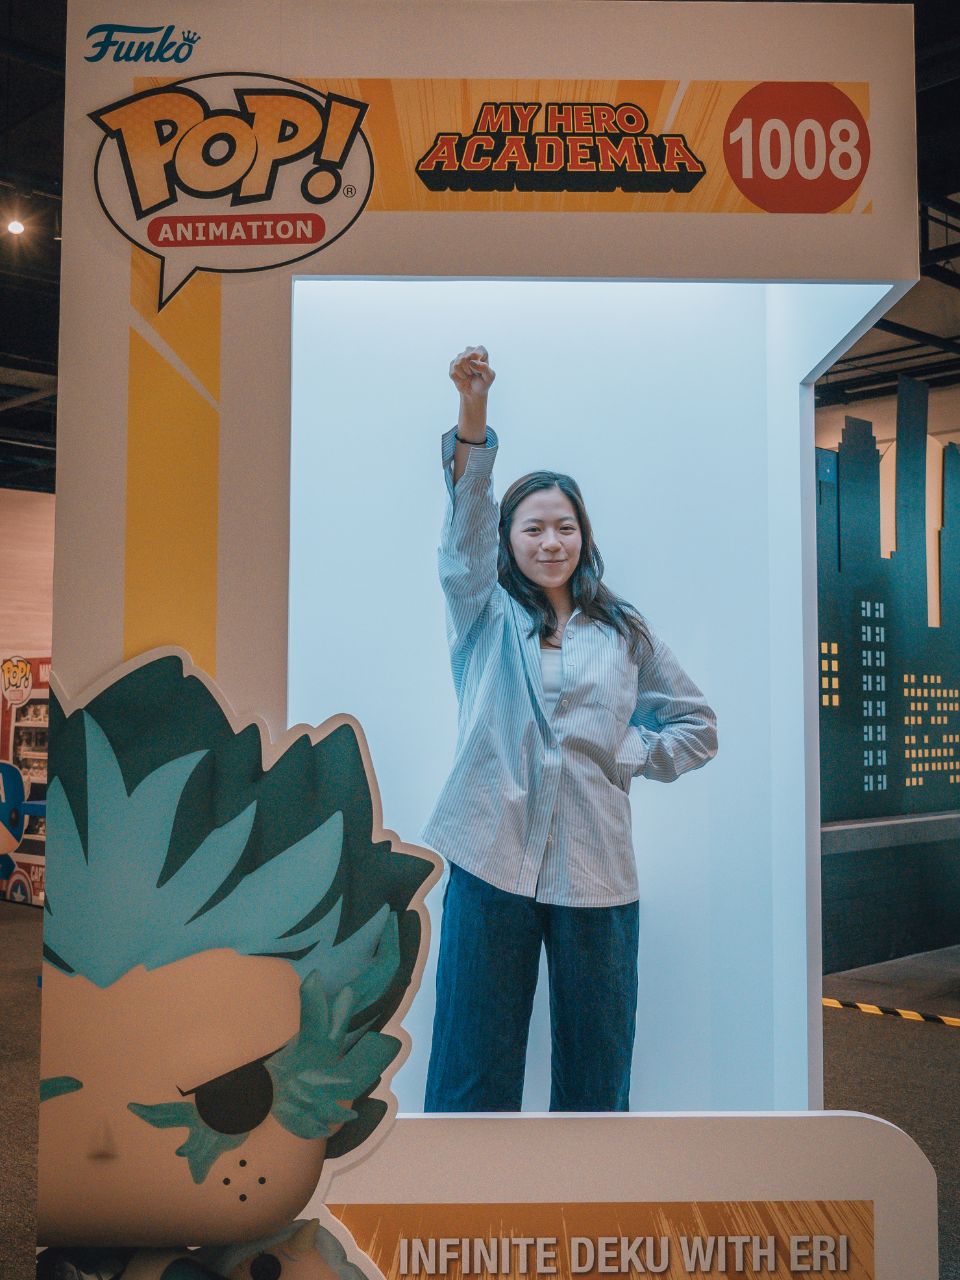 Funko launches pop-up store in Changi Airport - Passenger Terminal Today